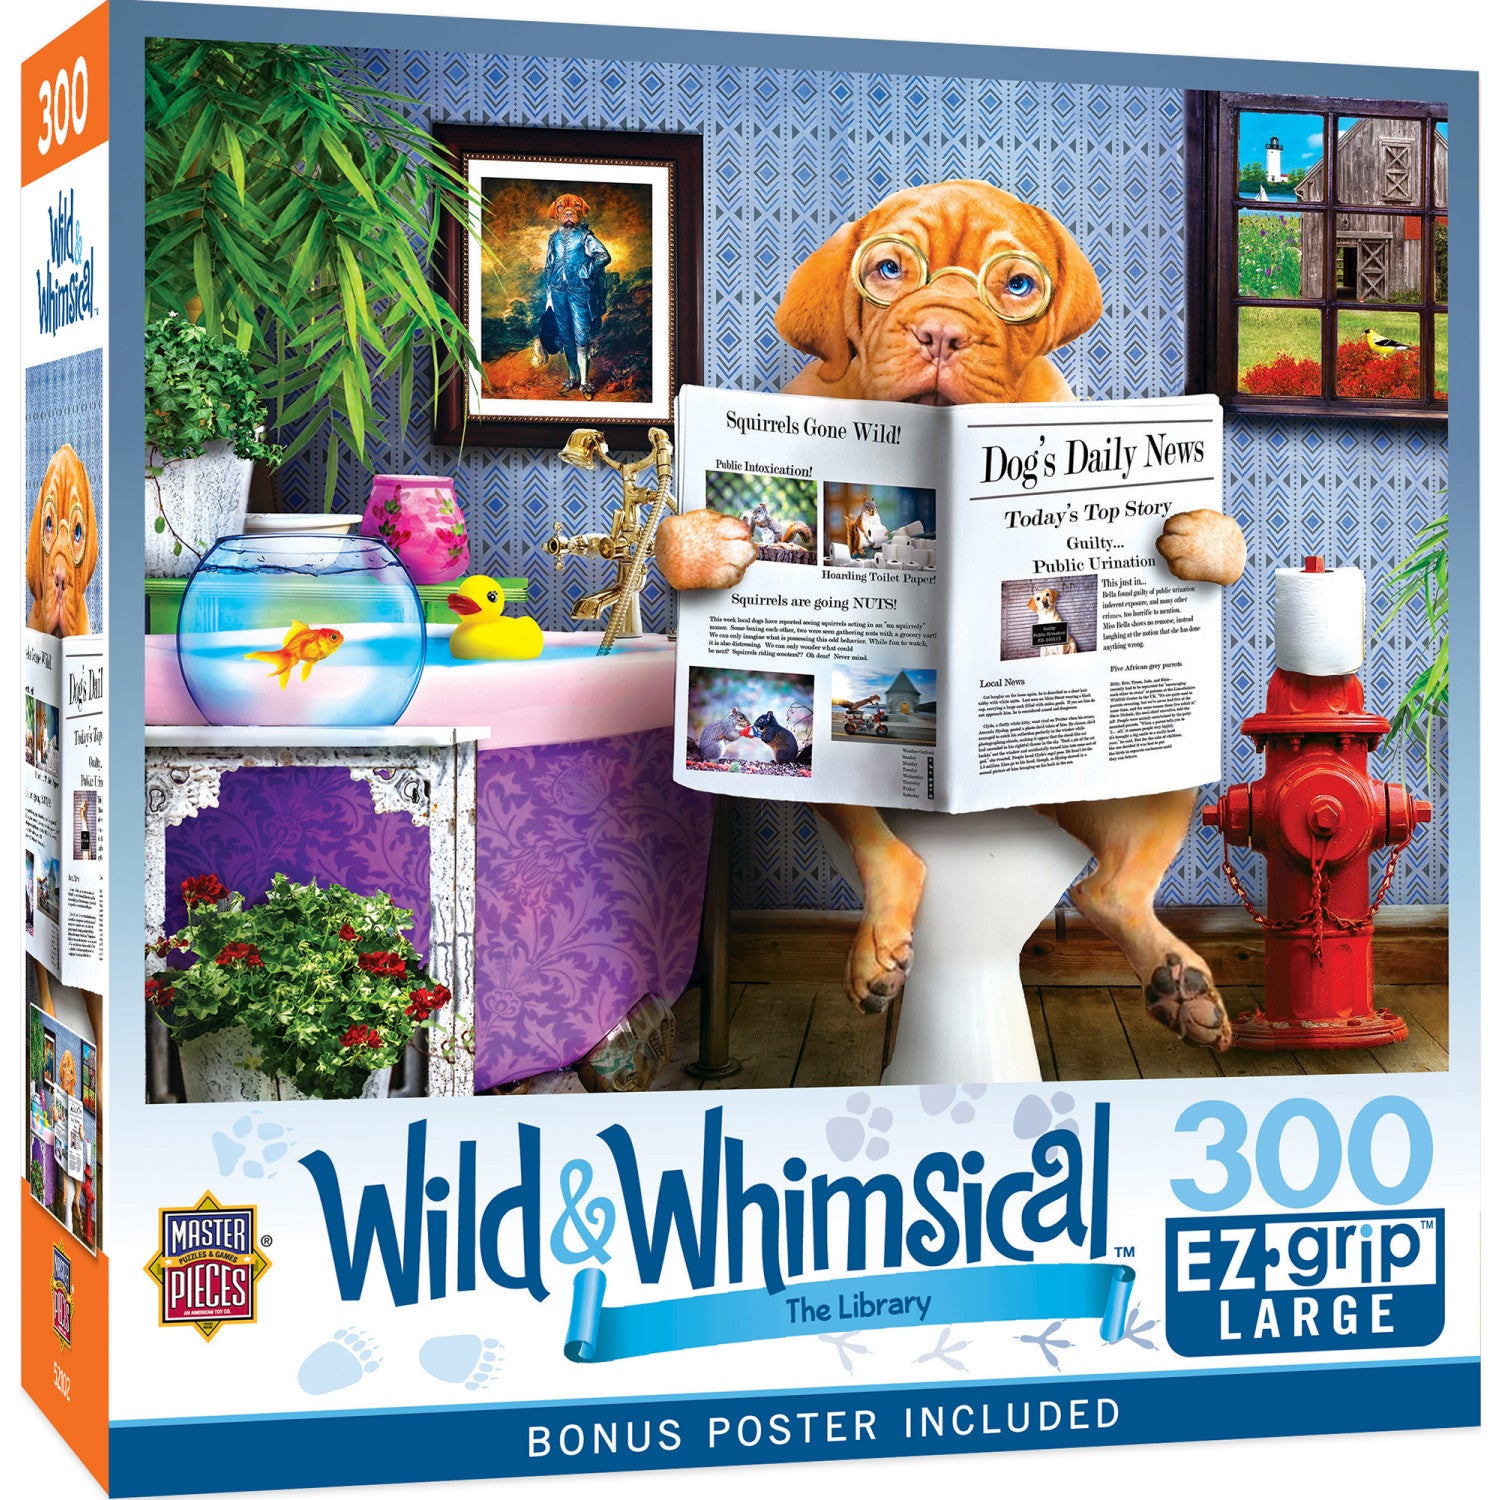 Wild & Whimsical - The Library 300 Piece EZ Grip Jigsaw Puzzle